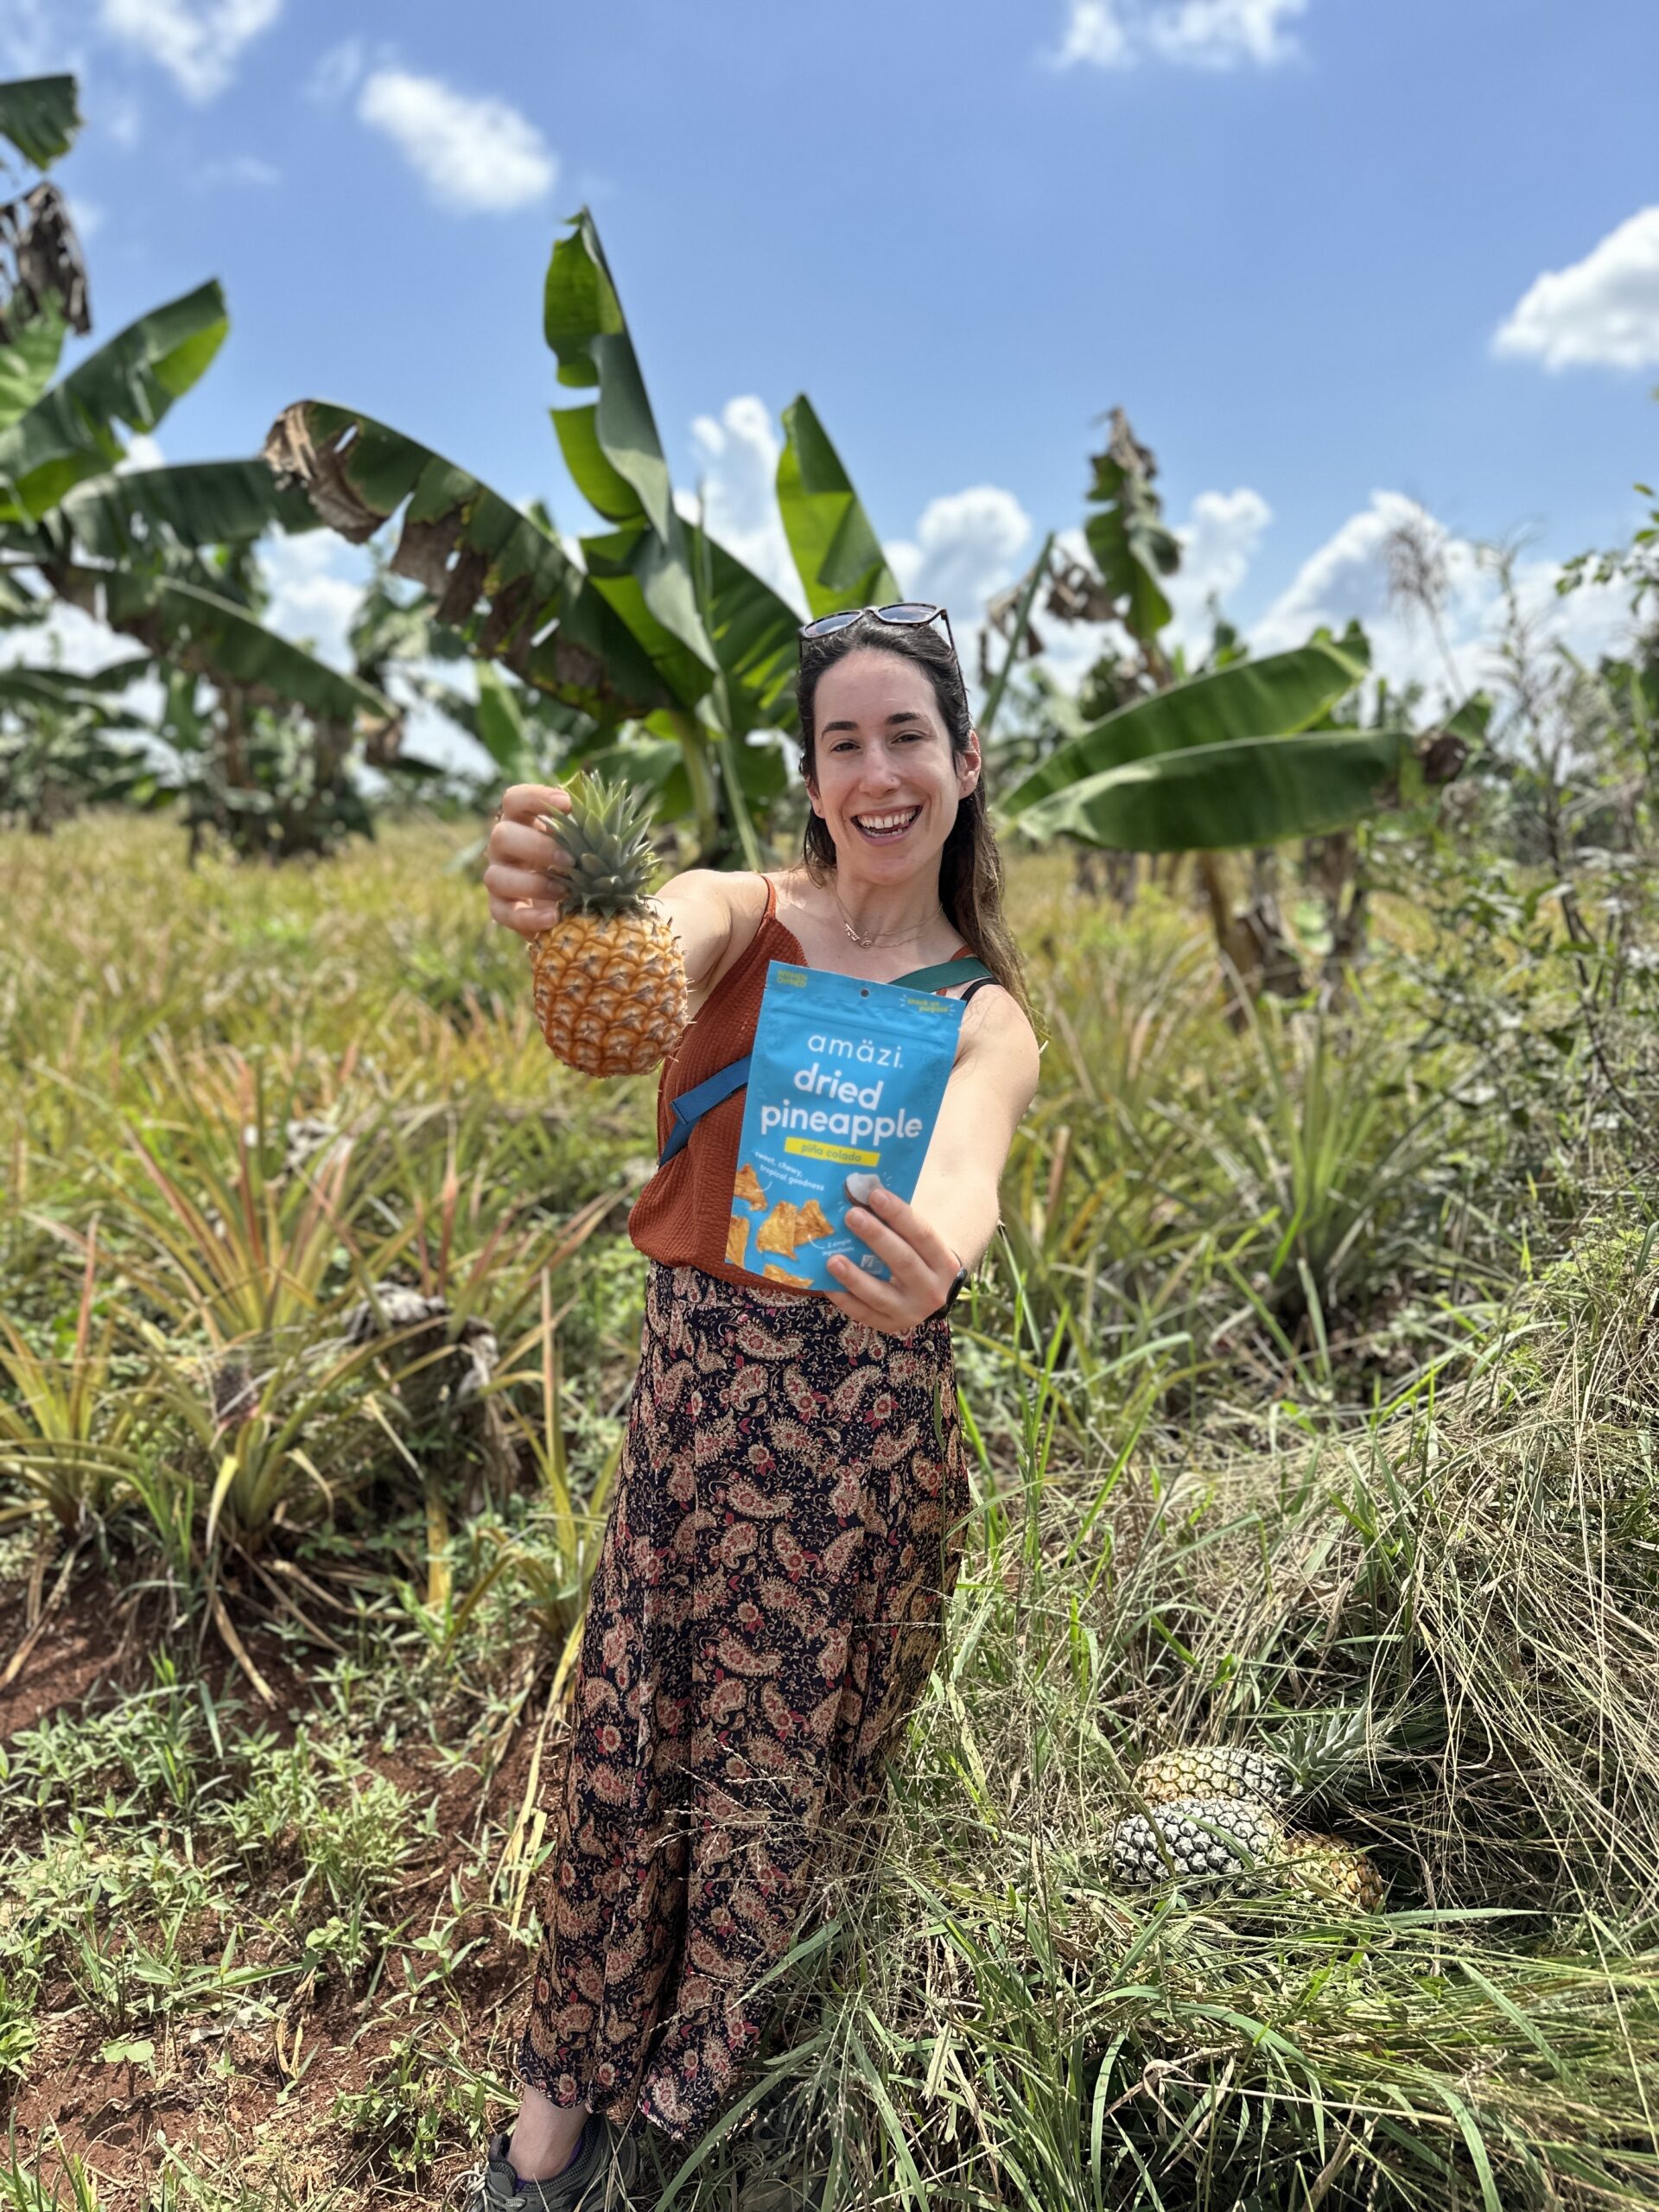 Renee with a pineapple product in a tropical landscape.